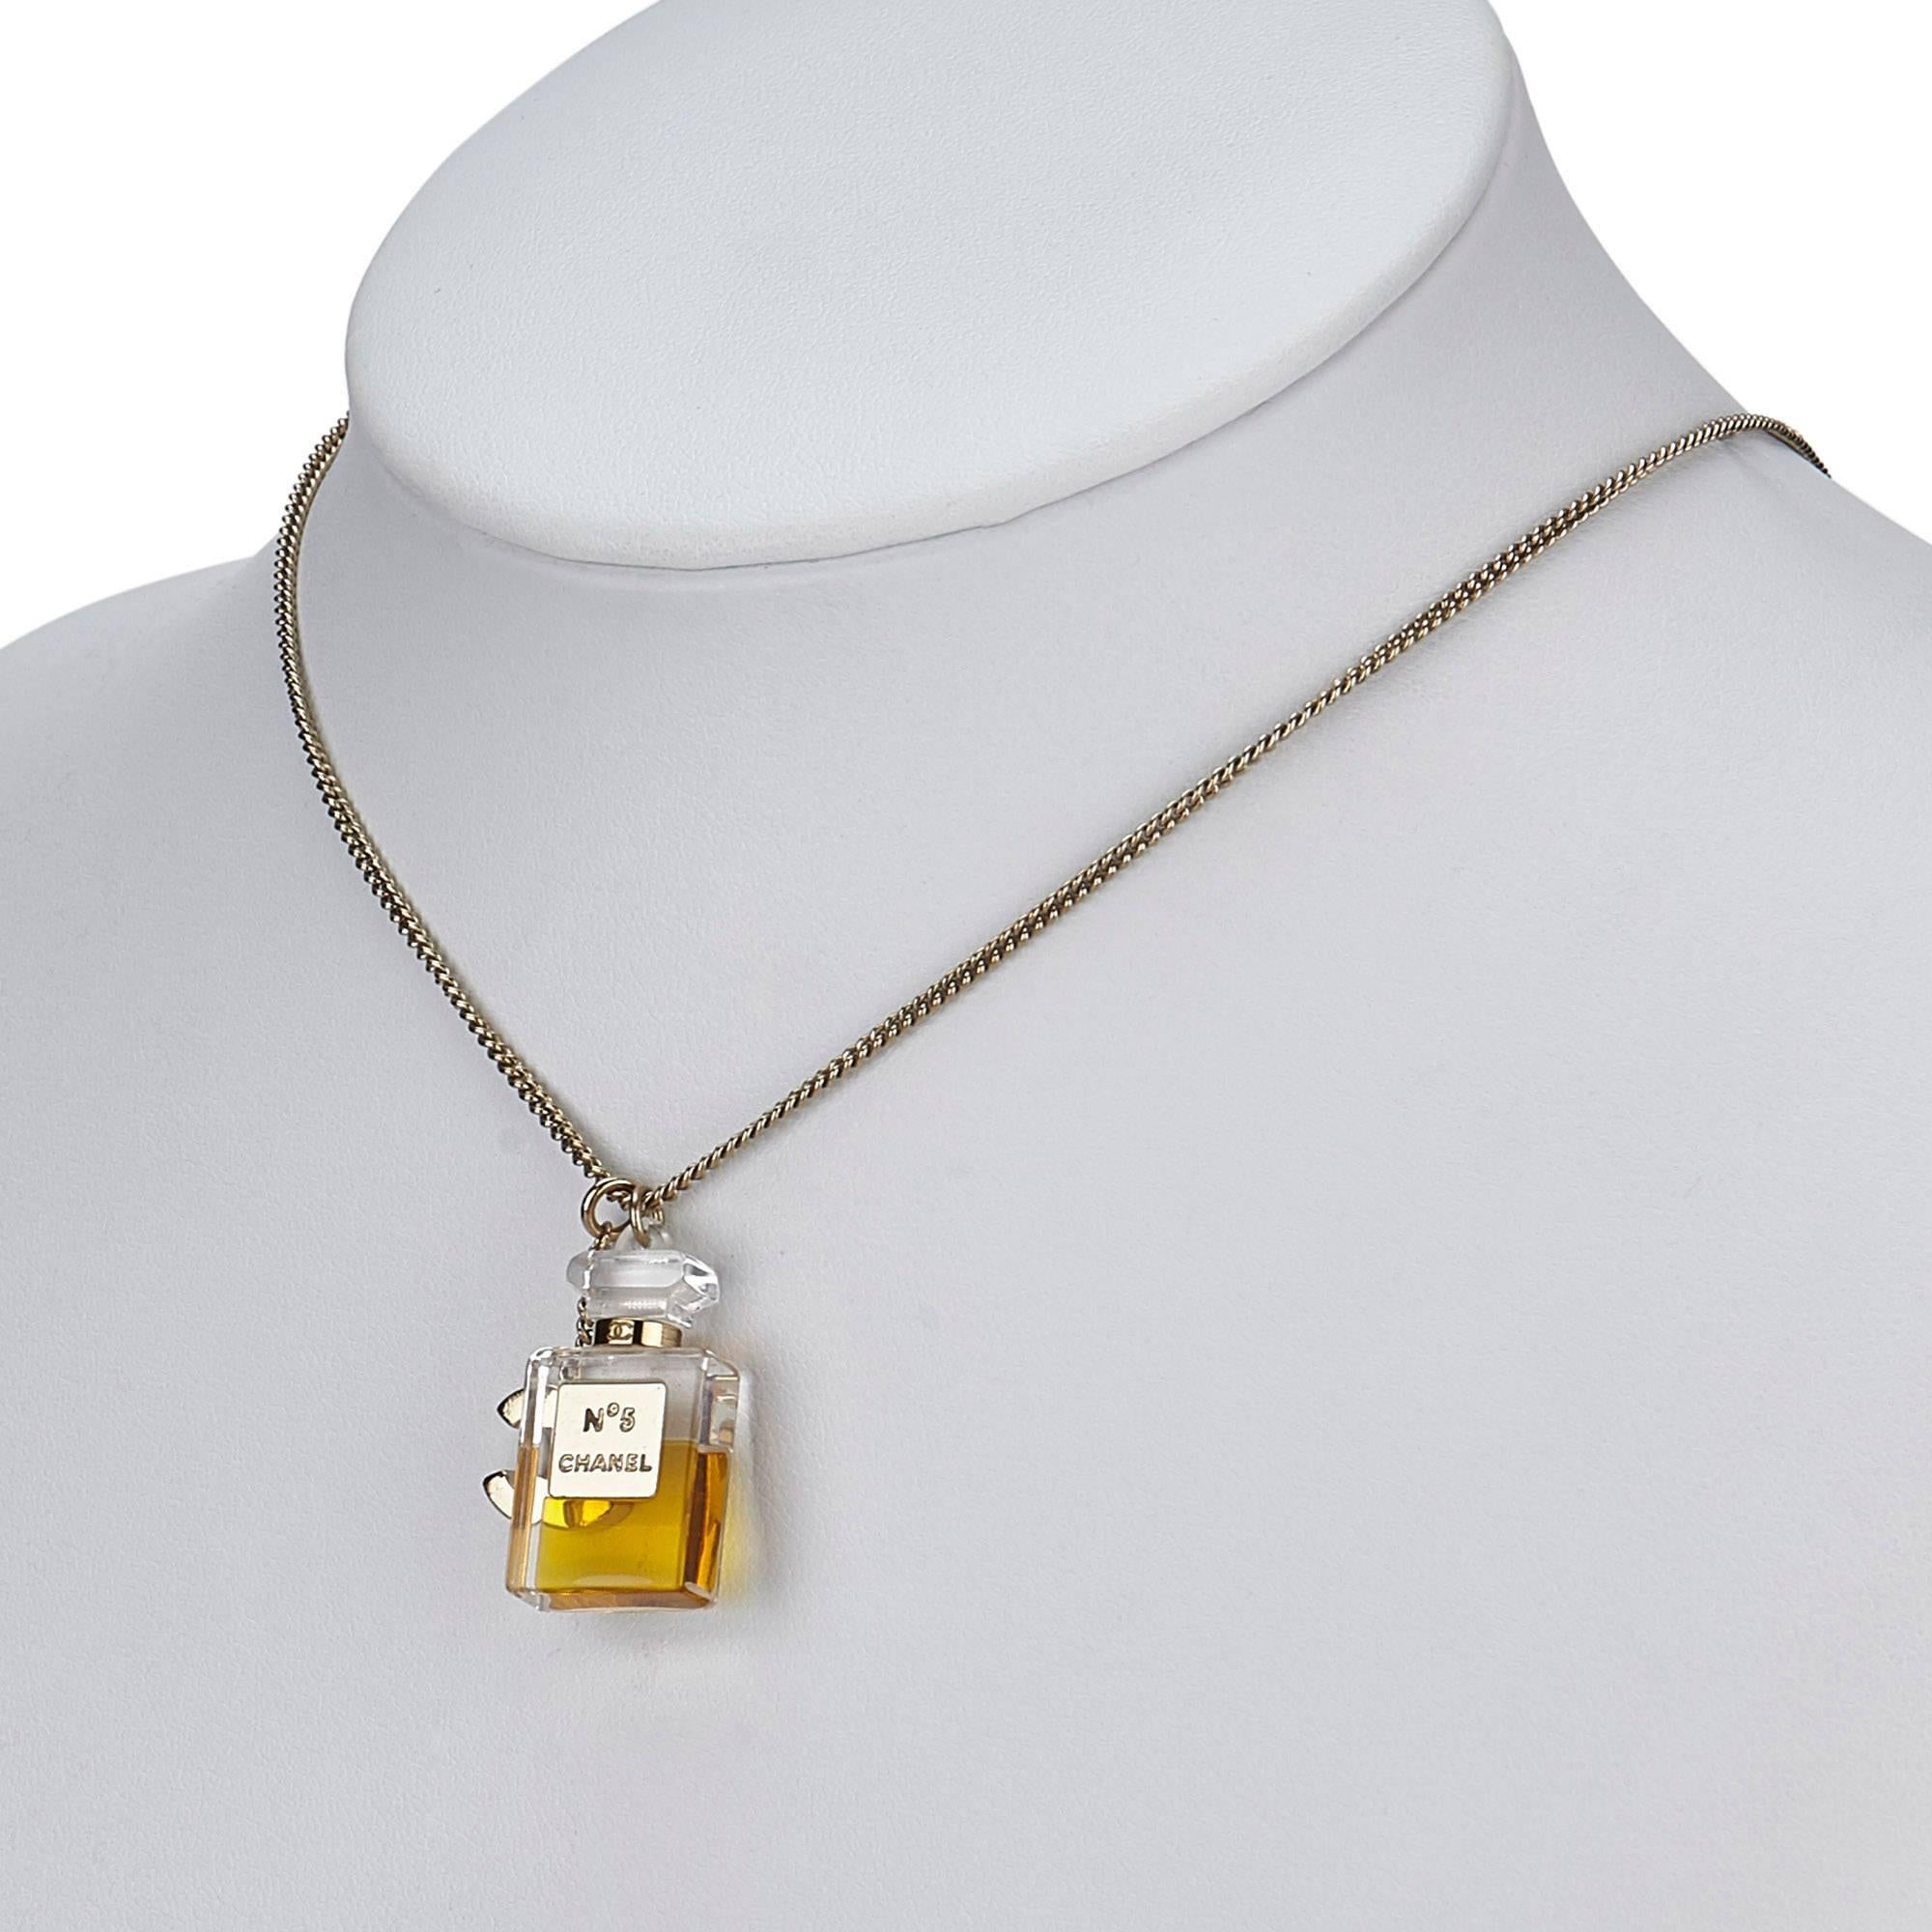 - This 2004A Chanel Pendants necklace features the iconic resin No.5 fragrance bottle charm, gold toned hardware "CC" logo charm, gold-tone chain, and springring closure. A classic Chanel No.5 perfume bottle charm with "CC" logo